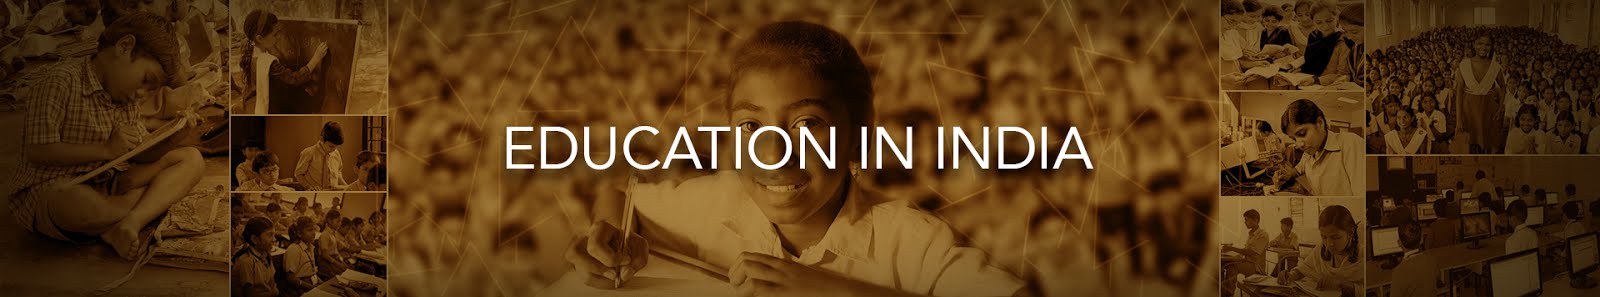 Education in India, Higher Education, School Education